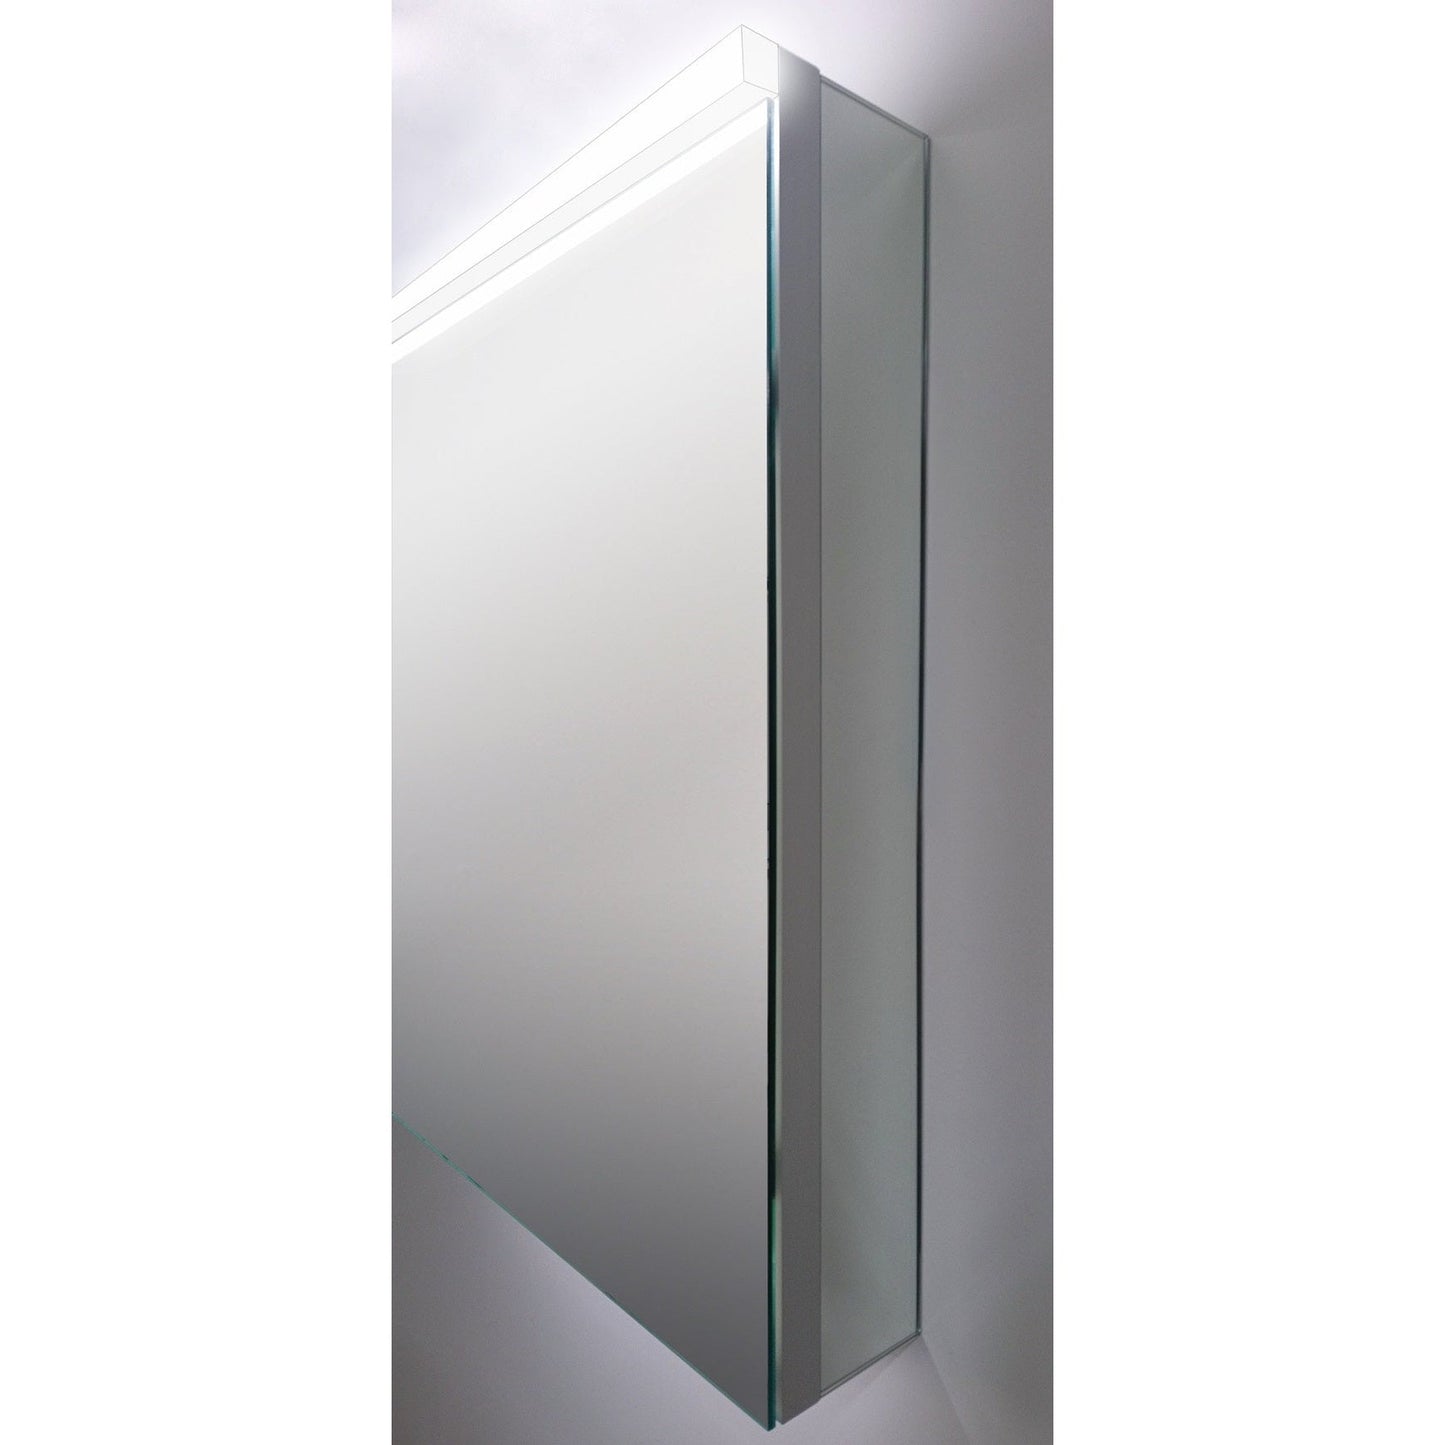 Sidler Xamo 20" x 30" 4000K Single Mirror Left Hinged Door Medicine Cabinet With Built-in GFCI outlet and Night Light Function